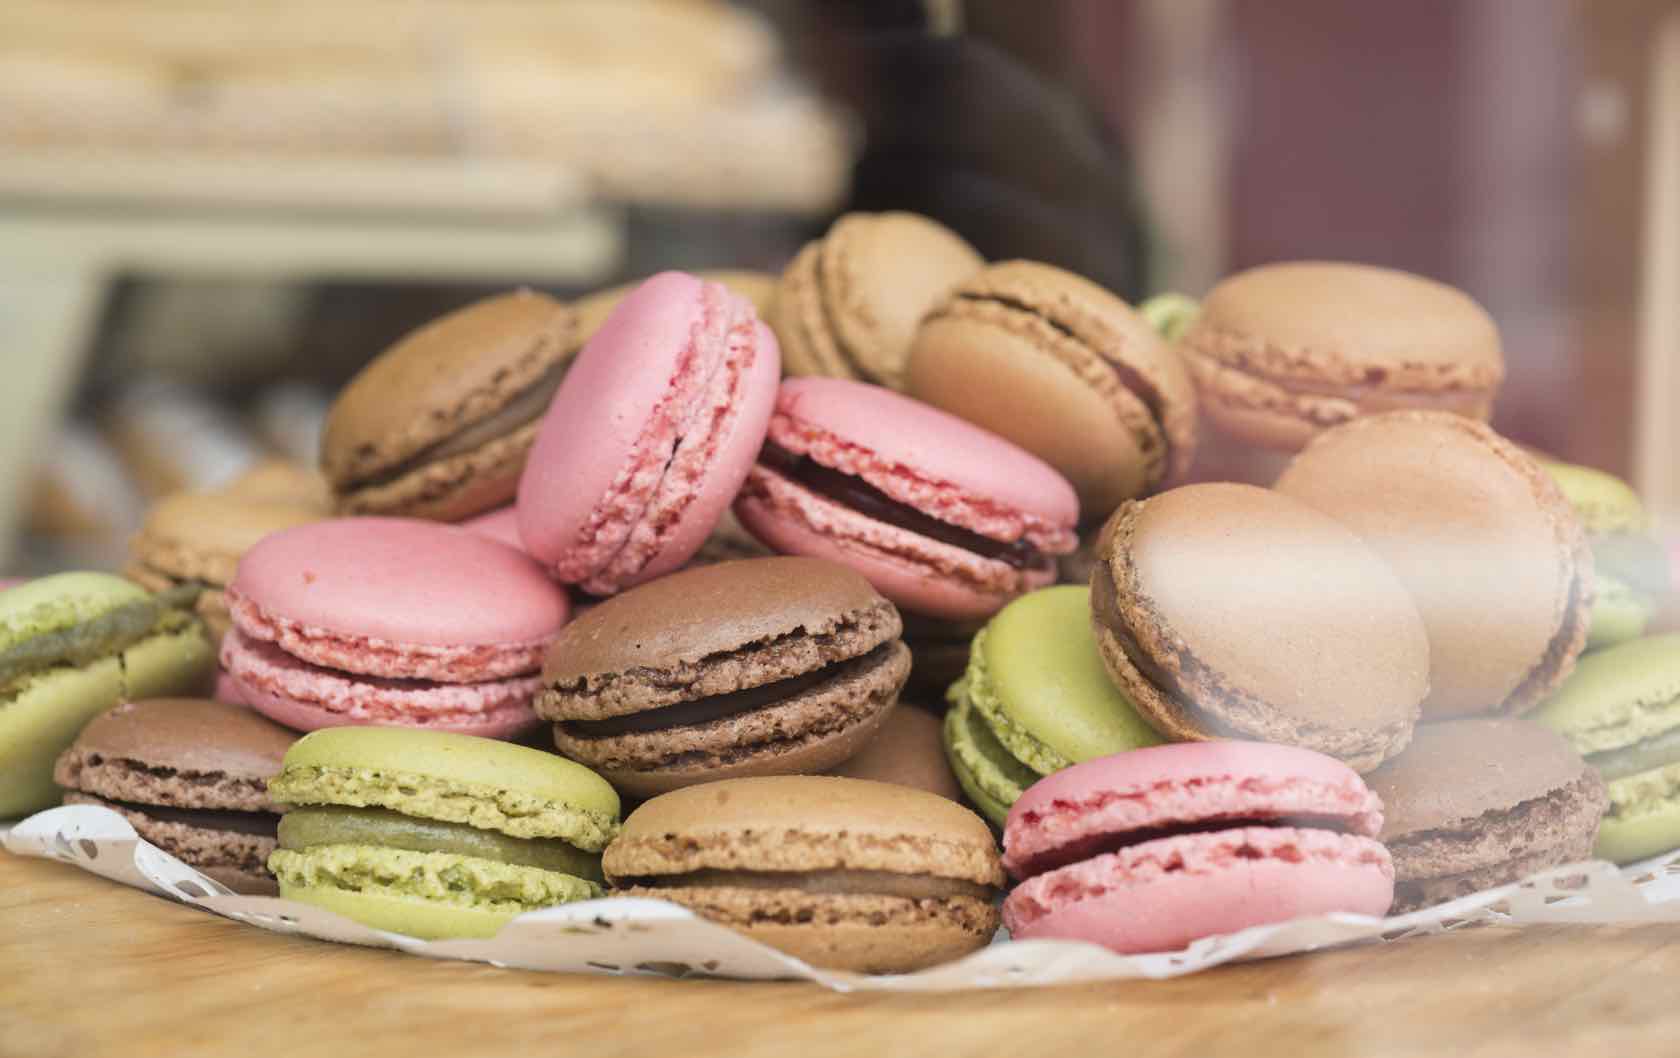 15 French Desserts To Eat In Paris That Will Satisfy Your Sweet Tooth By Paris Perfect4 